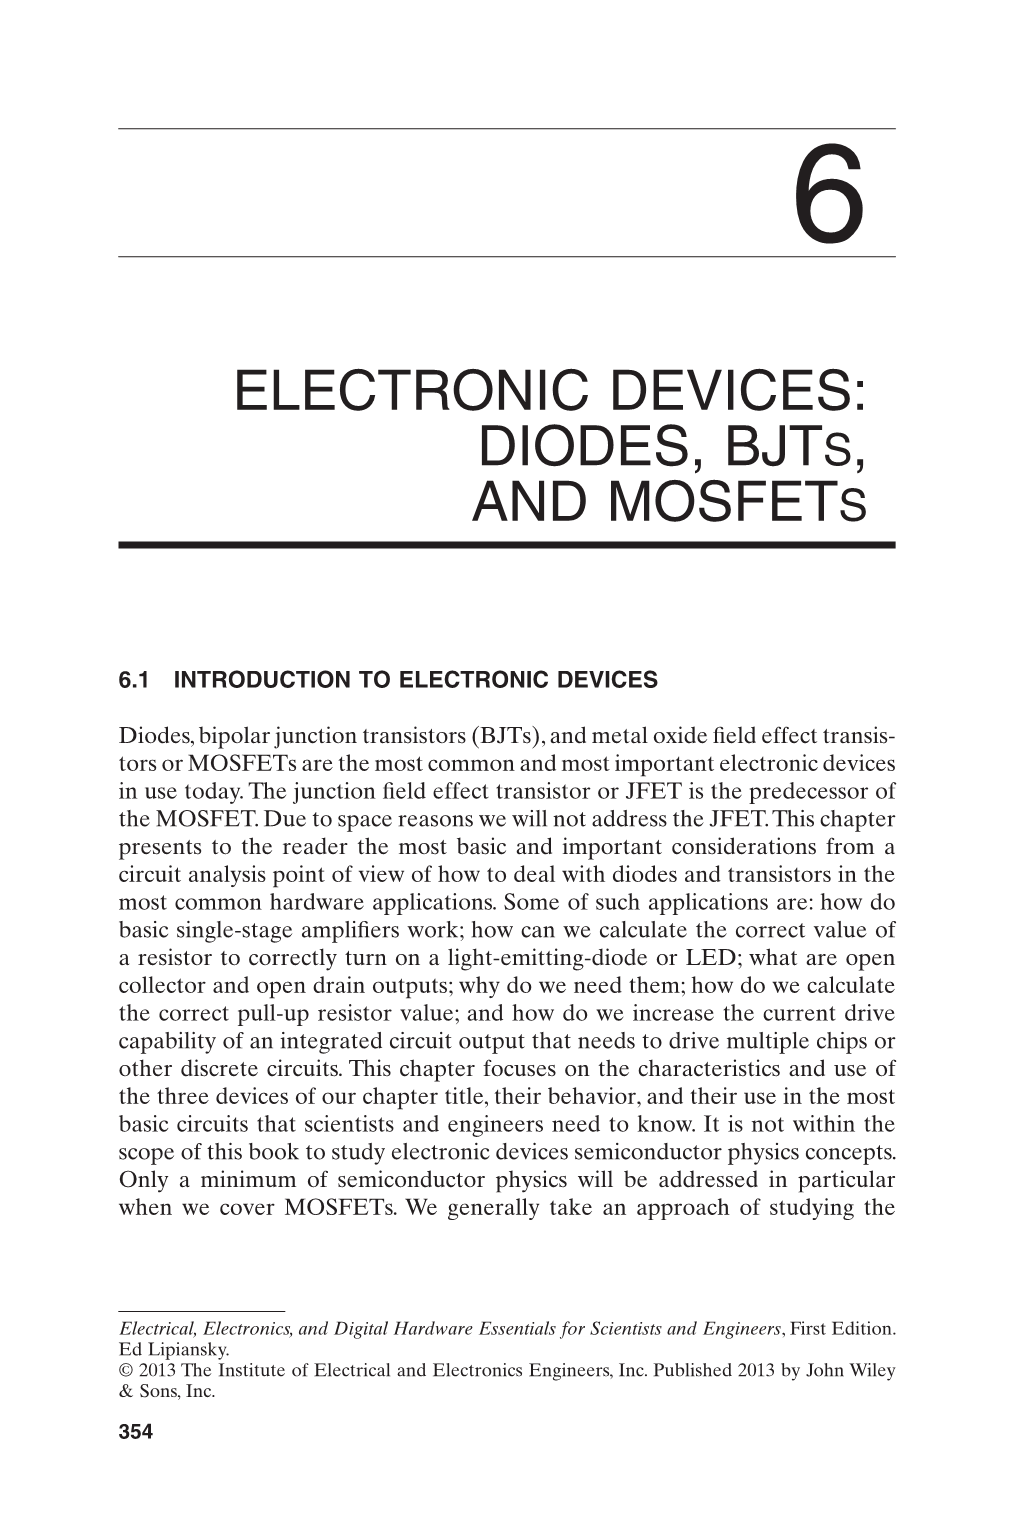 ELECTRONIC DEVICES: DIODES, Bjts, and Mosfets